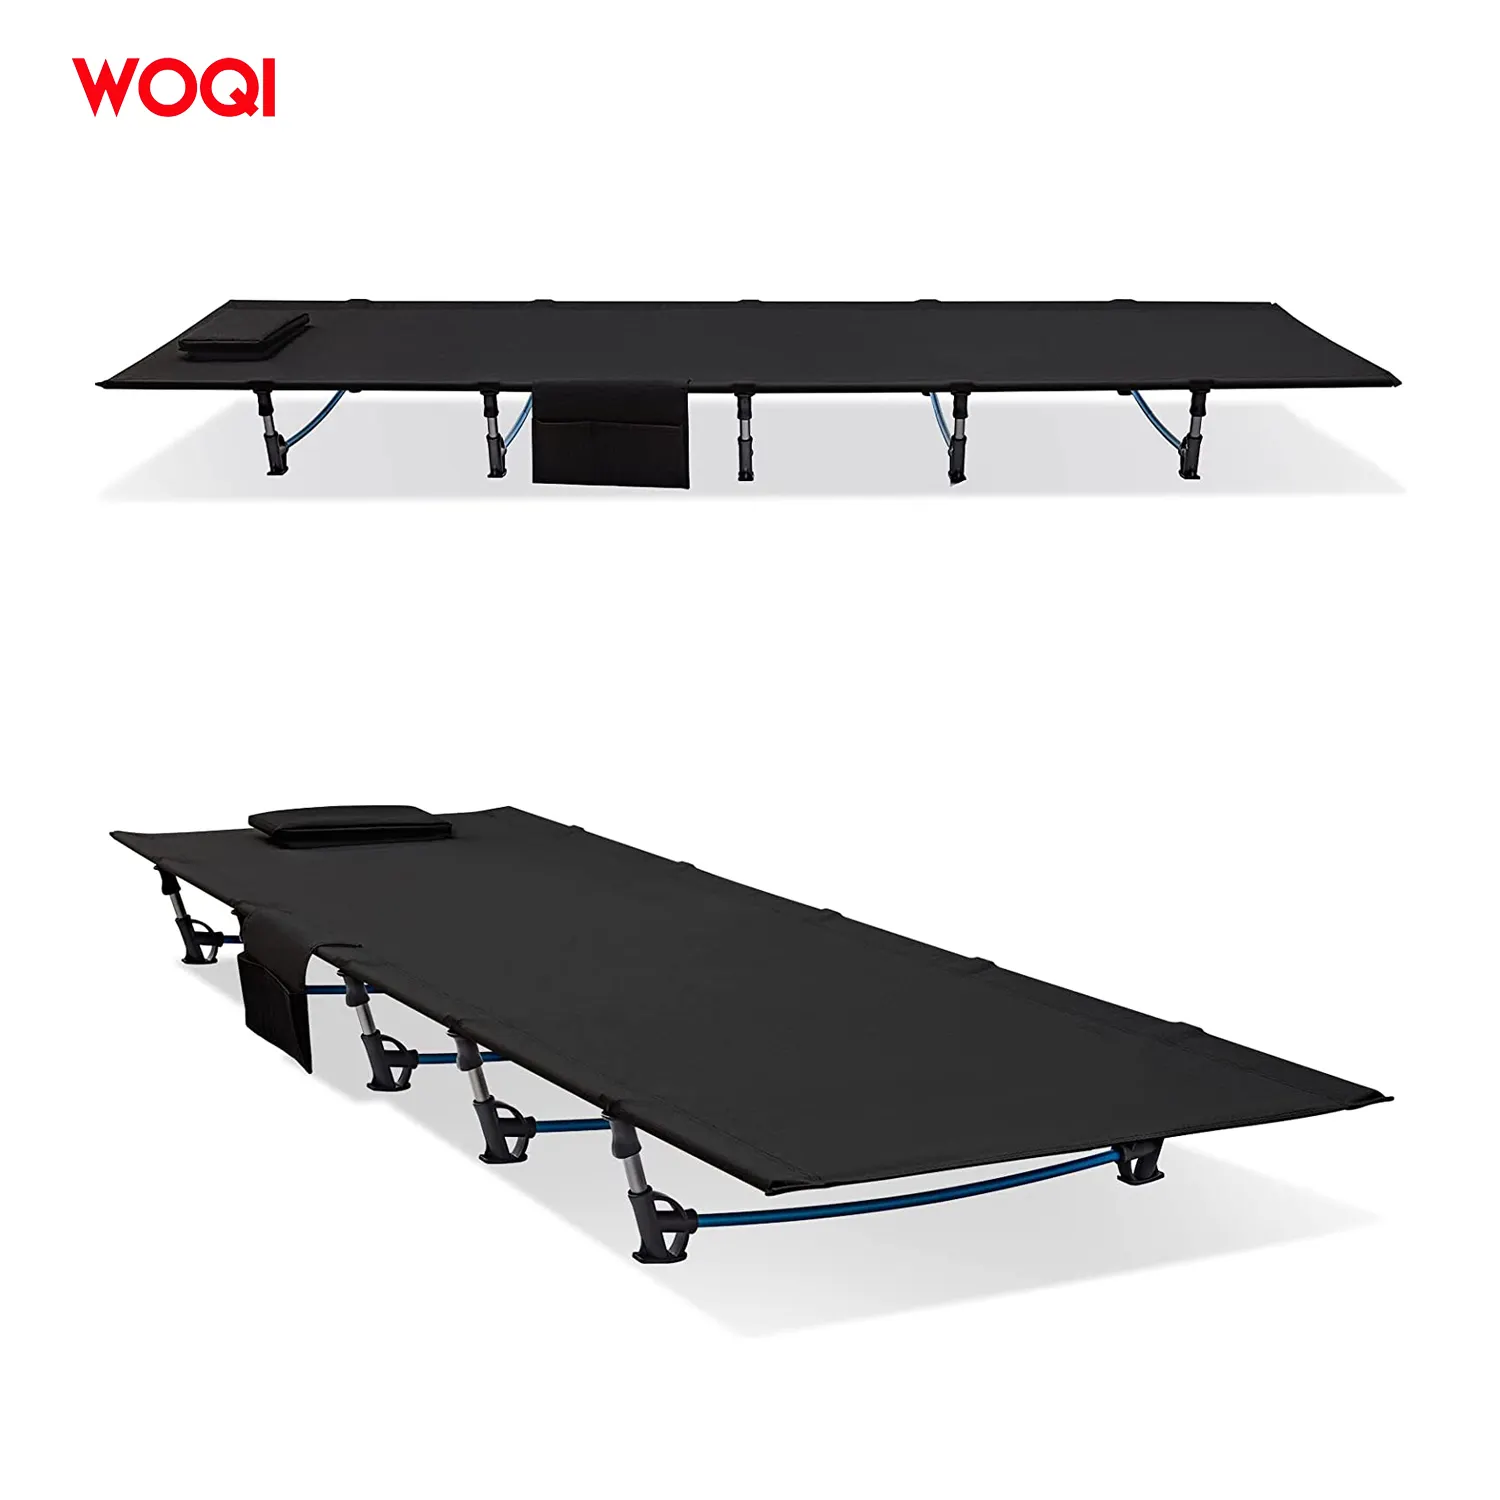 WOQI Aluminum Frame Folding Cot Camping Folding Bed Foldable Bed Outdoor Camping Sleeping Bed